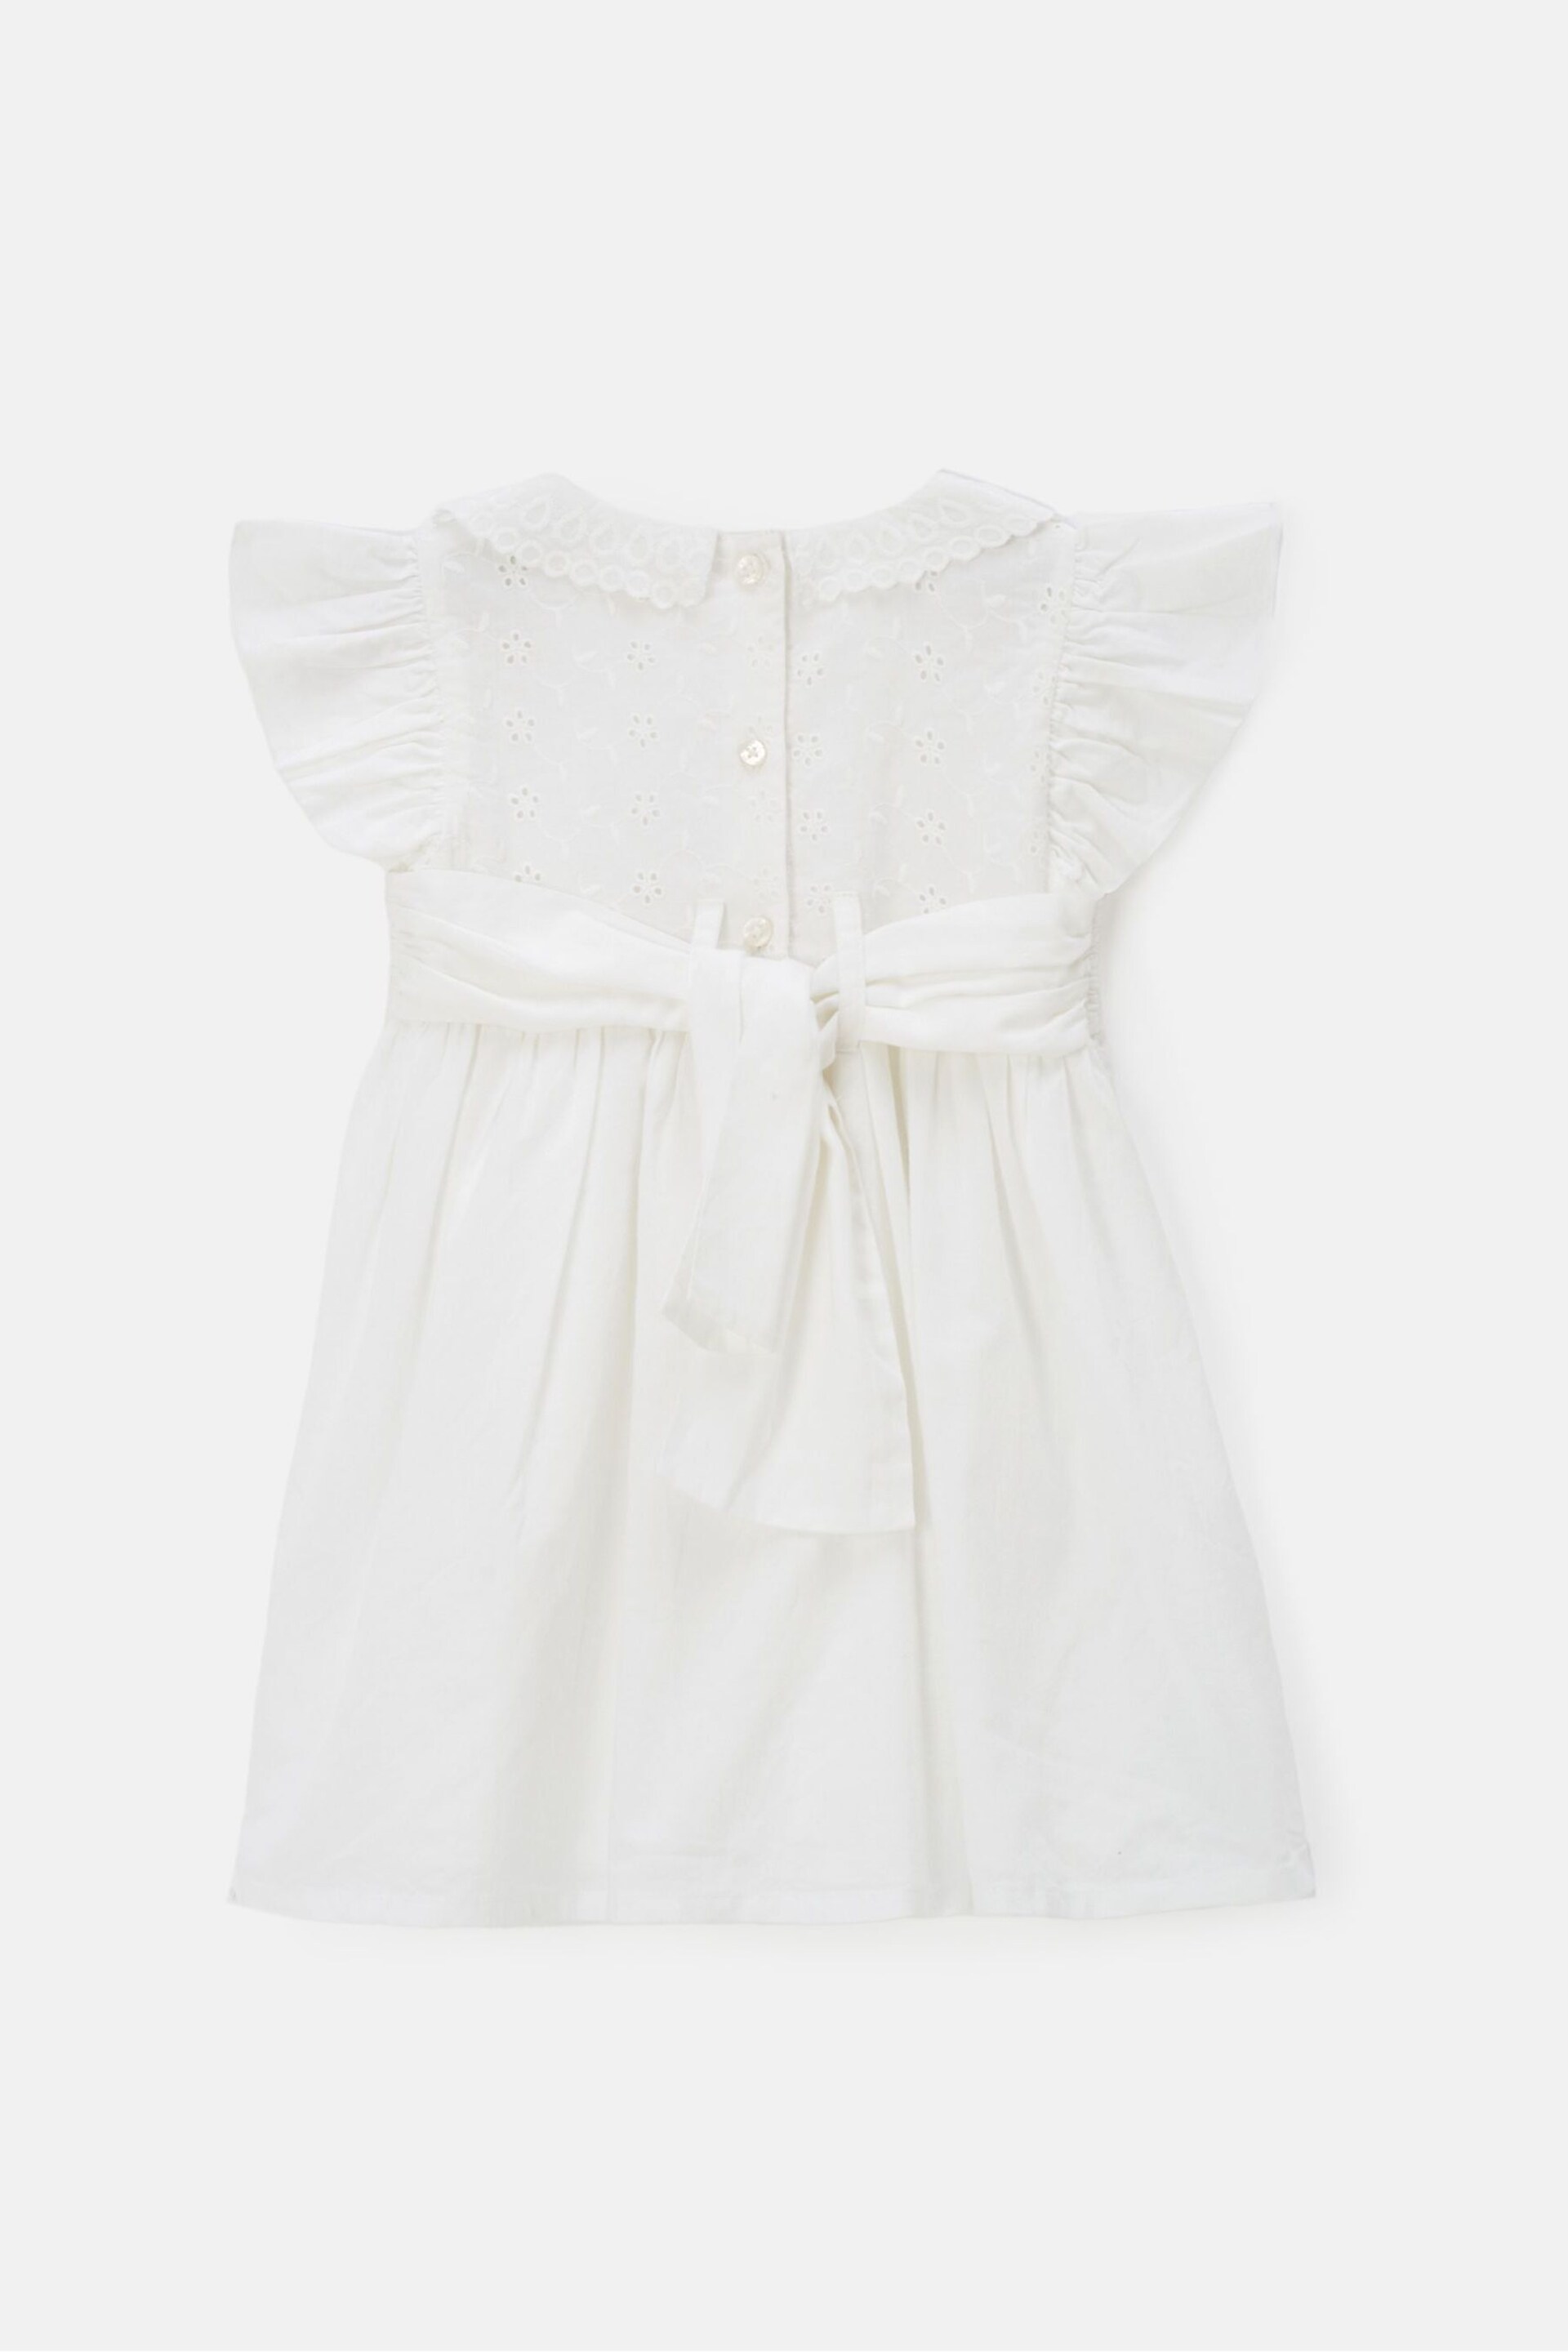 Angel & Rocket White Embroidered Collar Molly Dress - Image 3 of 4